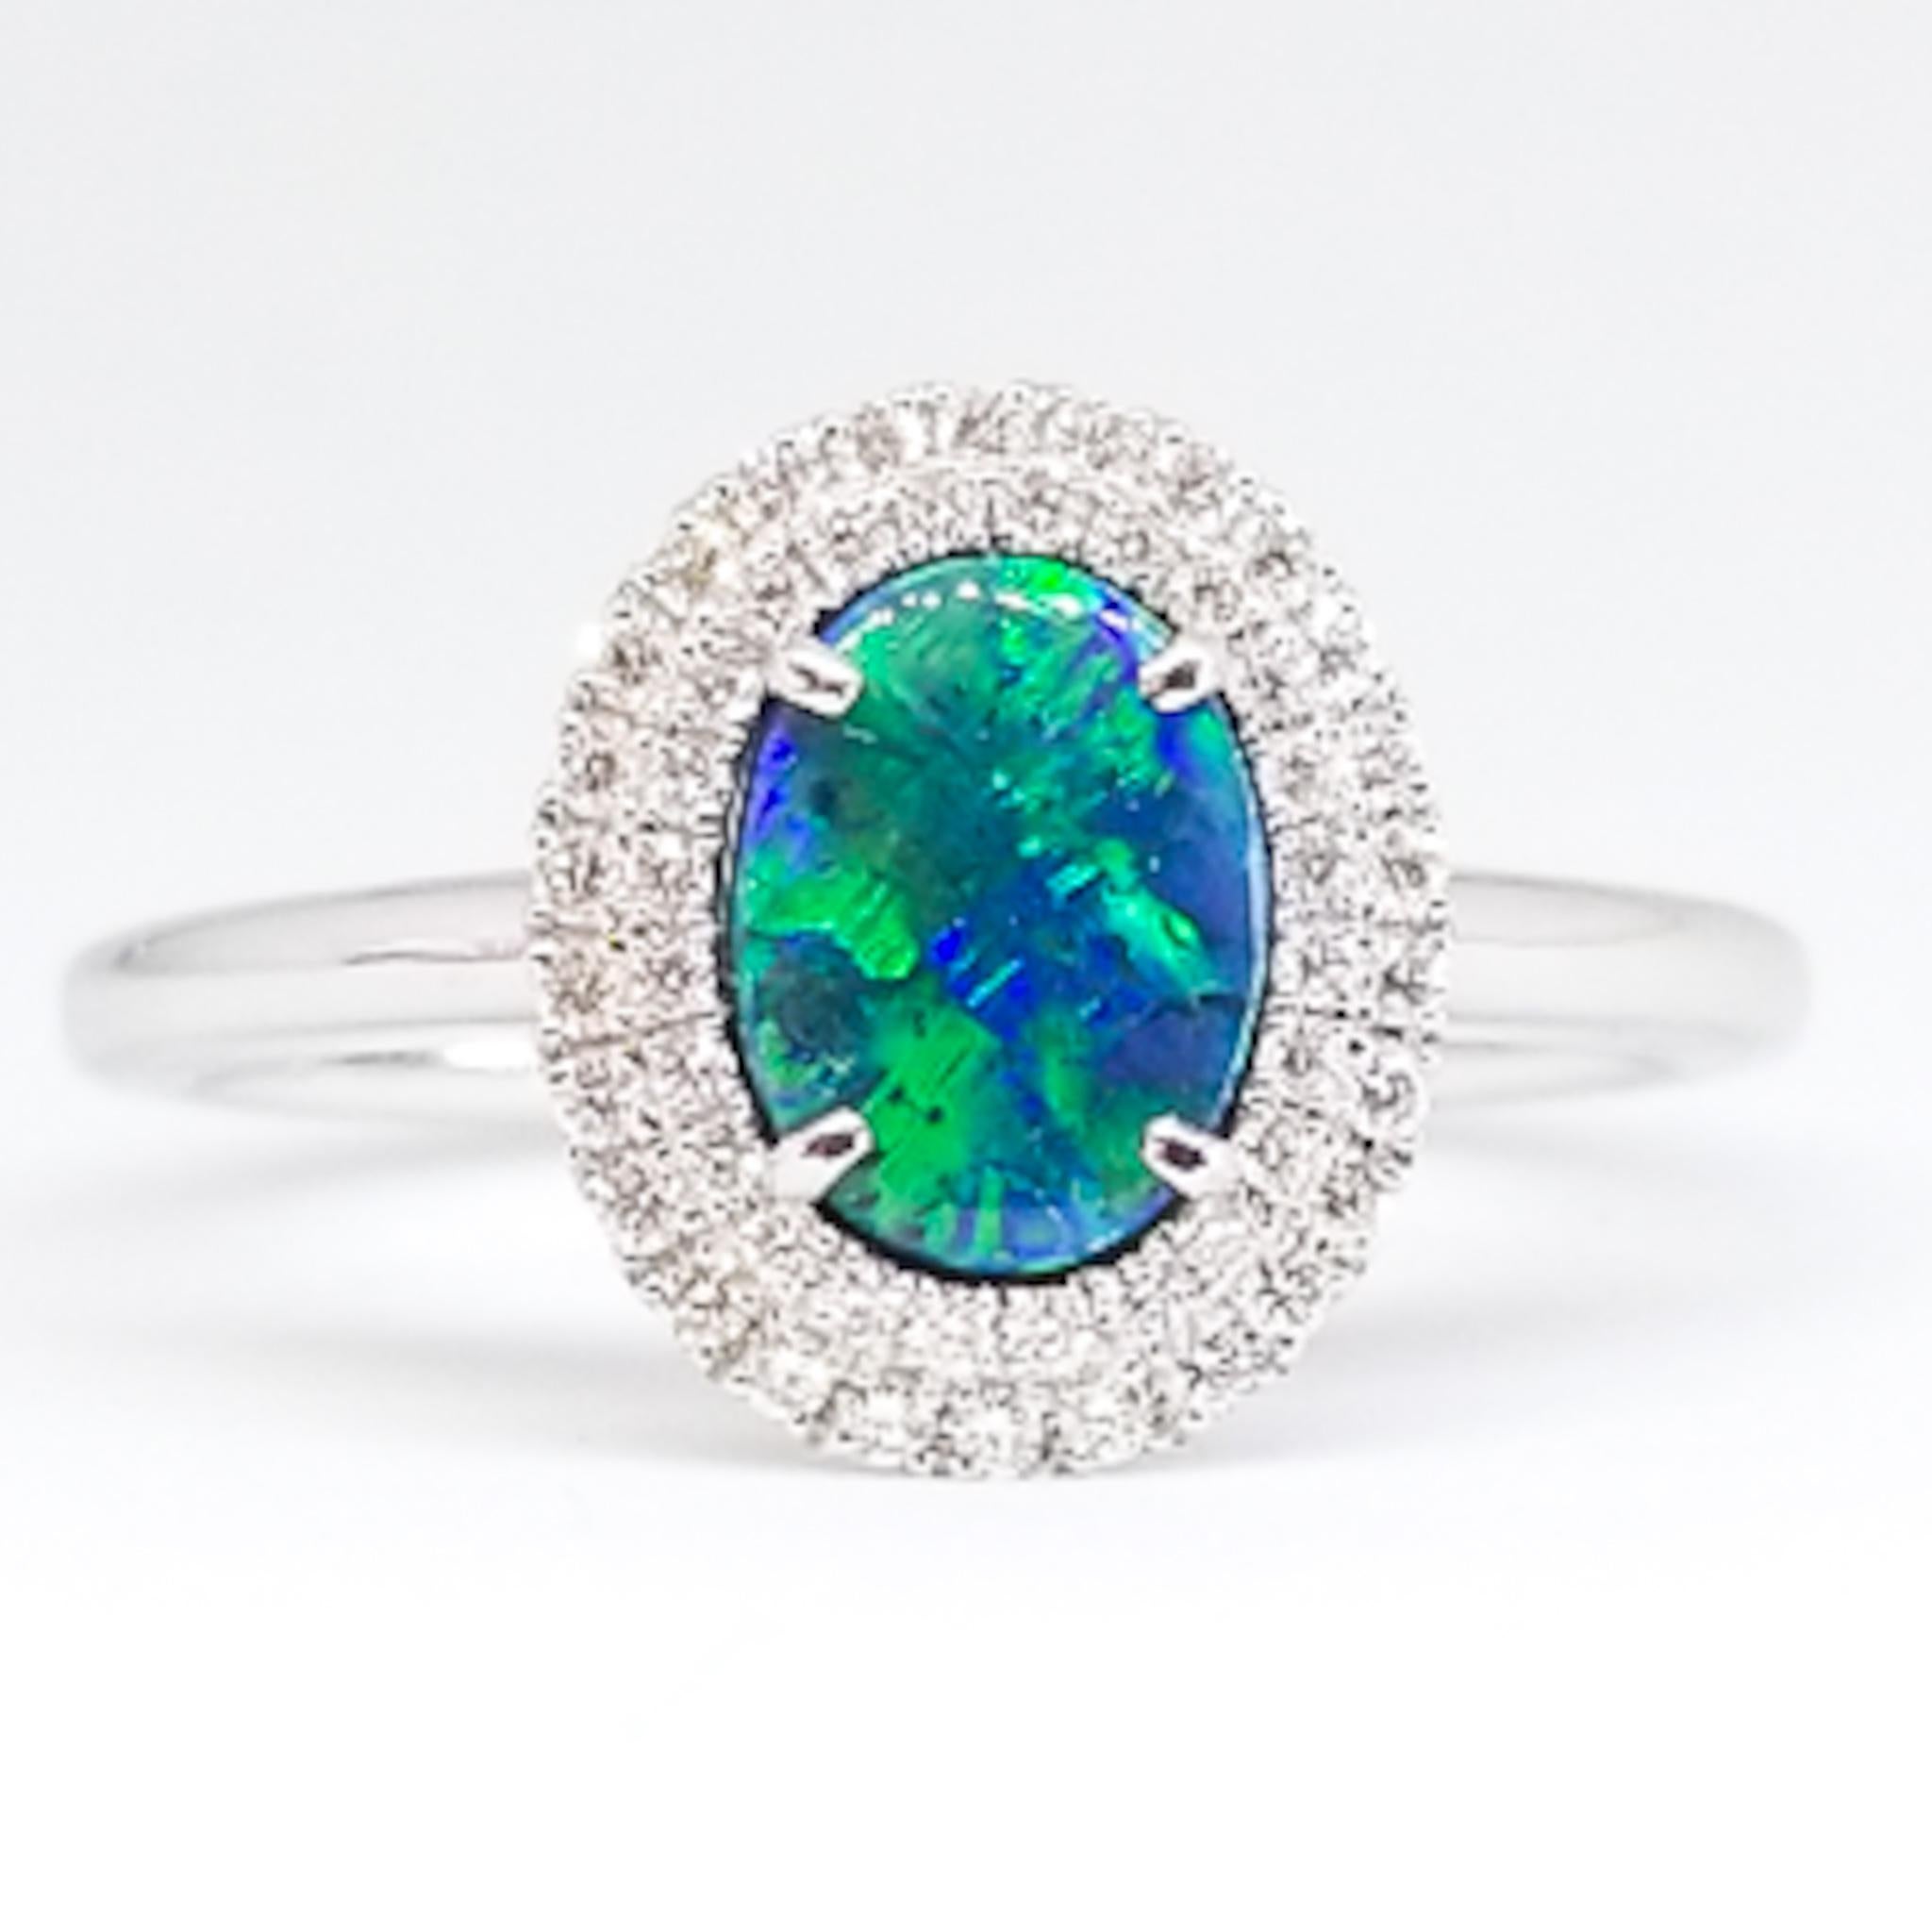 A Contemporary Engagement, Promise or Birthstone Ring is set with a 0.51 Carat Oval, Natural Australian Black Opal with Deep Color Saturation and Light Play. The Gem Quality stone shows fire of Blues and Greens and is set in prongs, surrounded by a